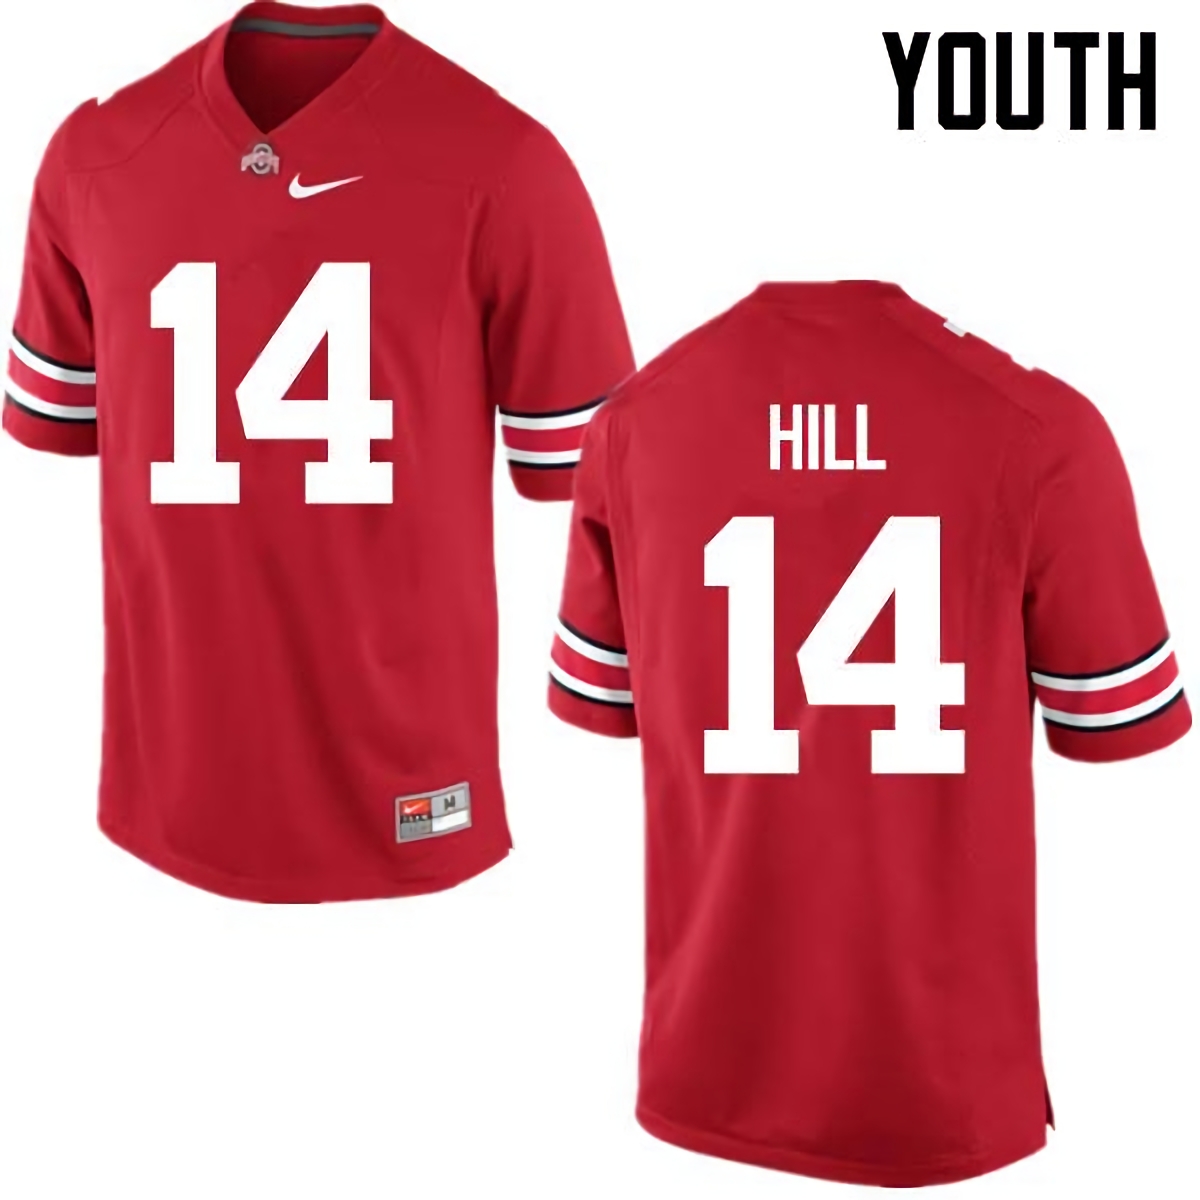 KJ Hill Ohio State Buckeyes Youth NCAA #14 Nike Red College Stitched Football Jersey RNK4456OV